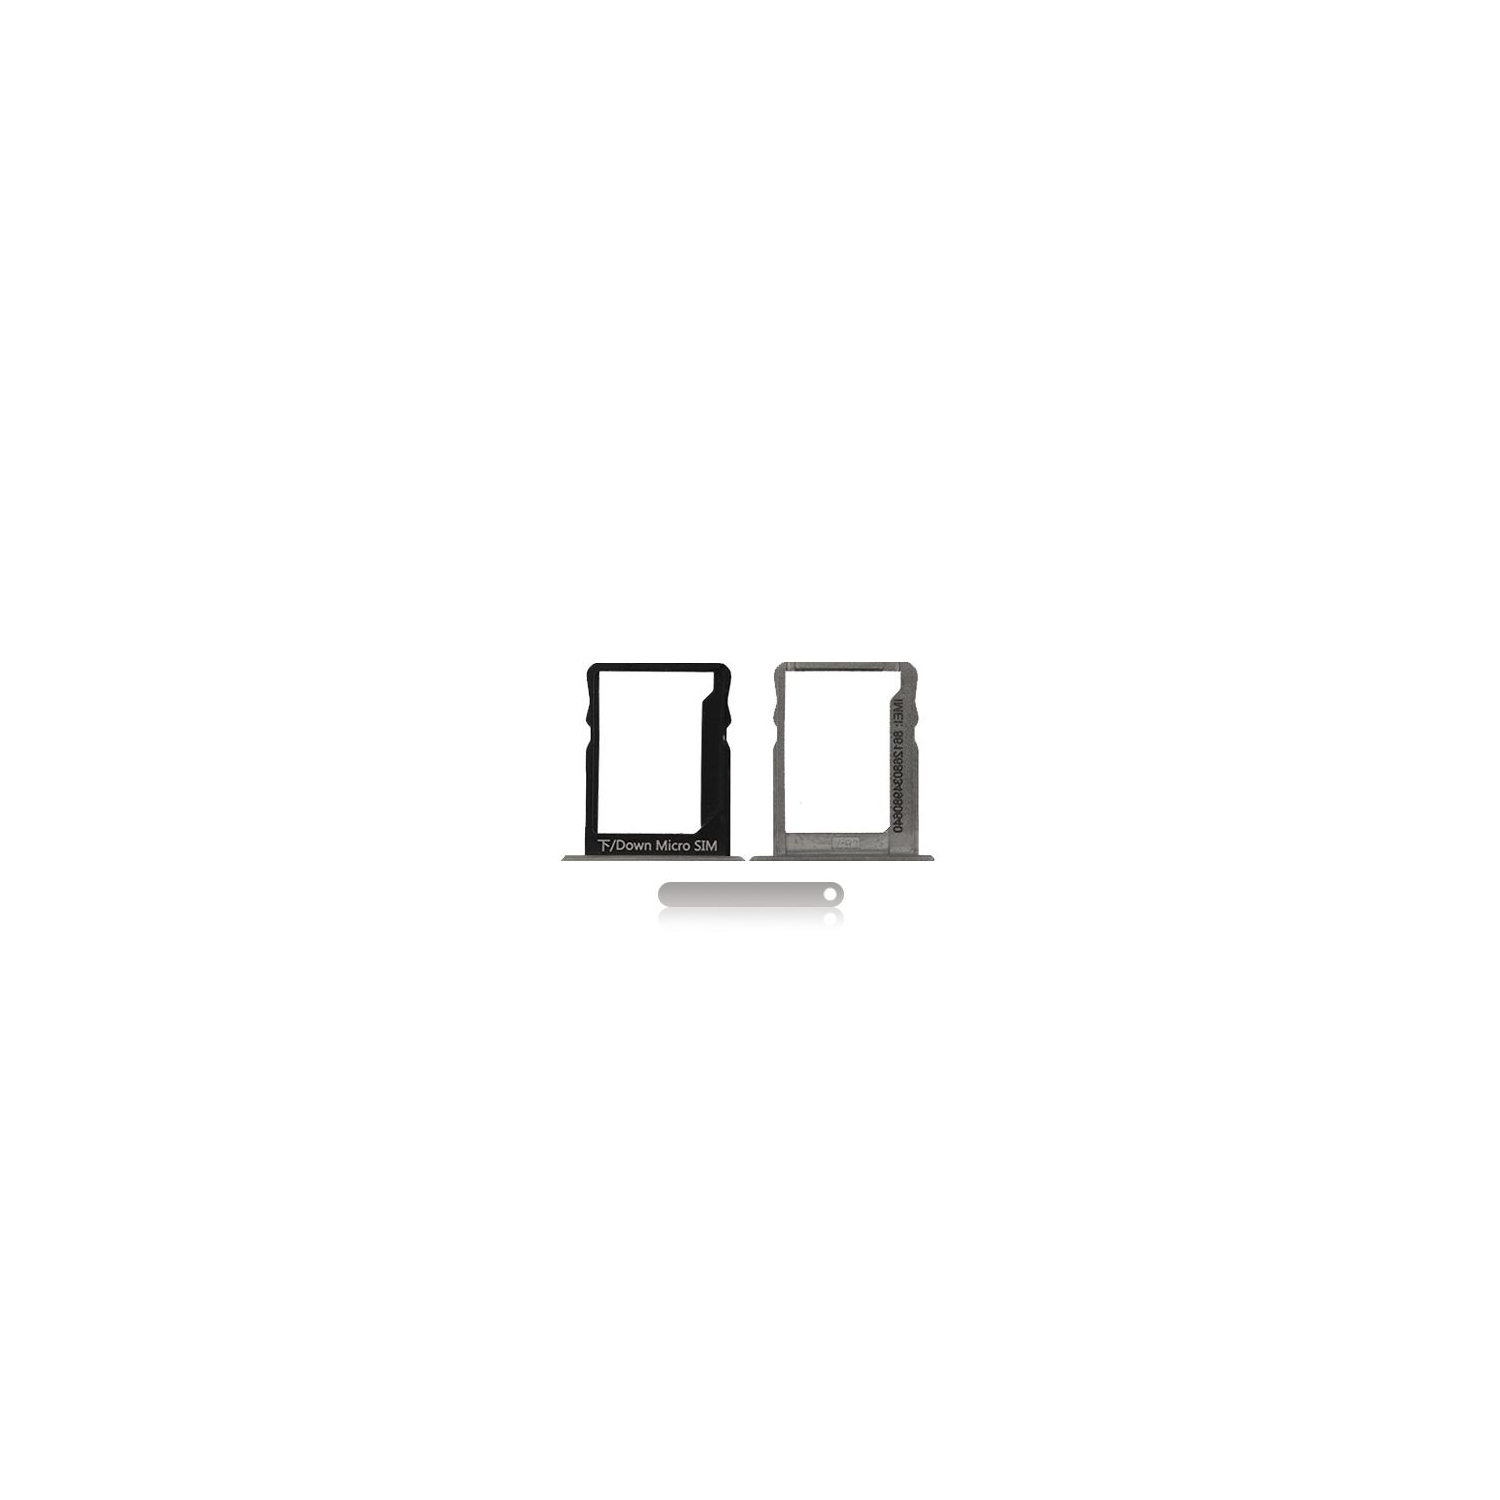 Replacement Sim Card + SD Card Tray Compatible For Huawei P8 Lite (White)